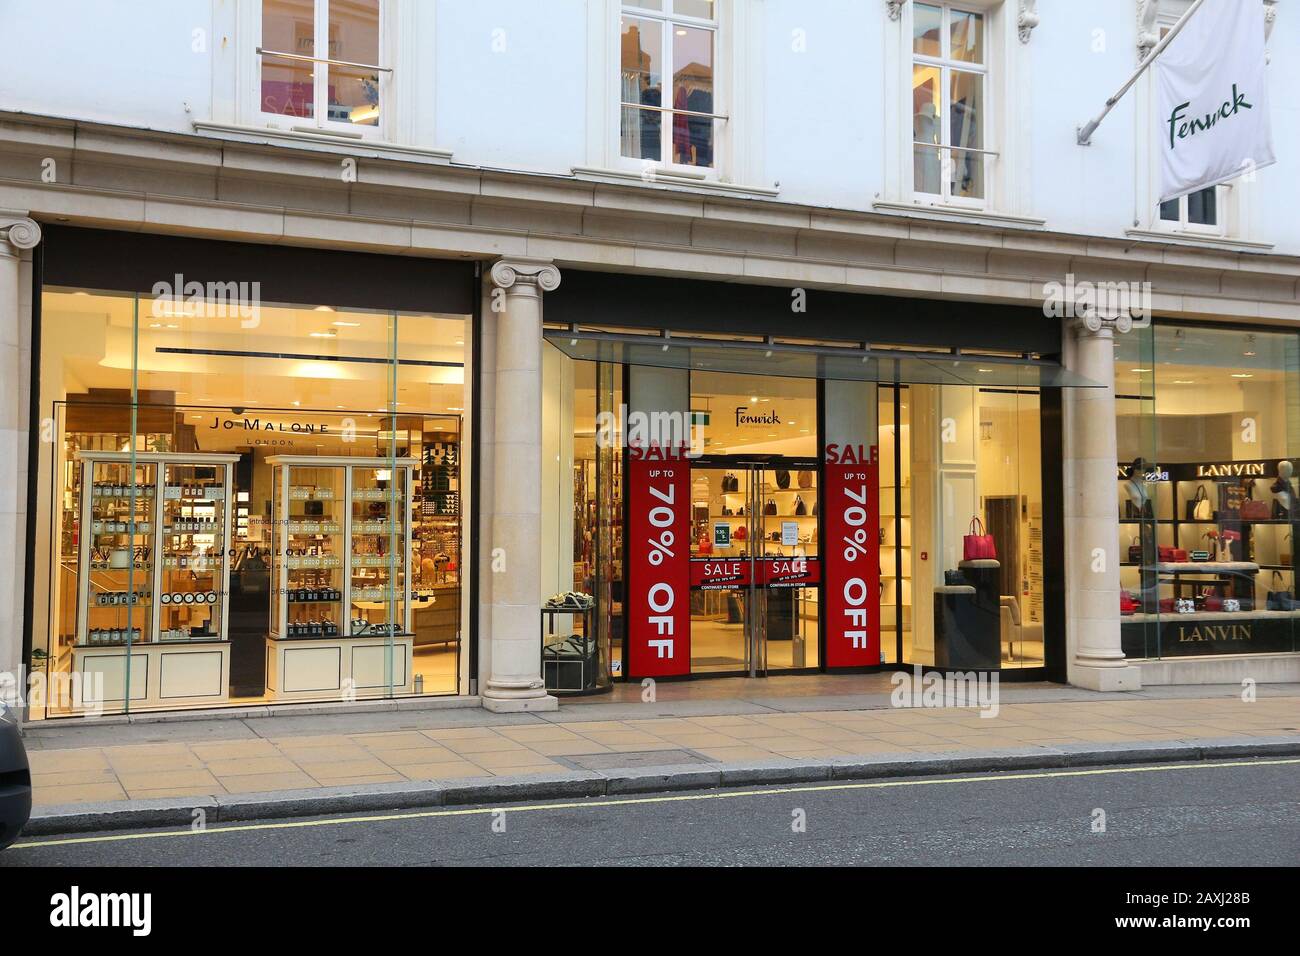 LONDON, UK - JULY 6, 2016: Fenwick department store at Bond Street in London. Bond Street is a major shopping destination of West End in London. Stock Photo